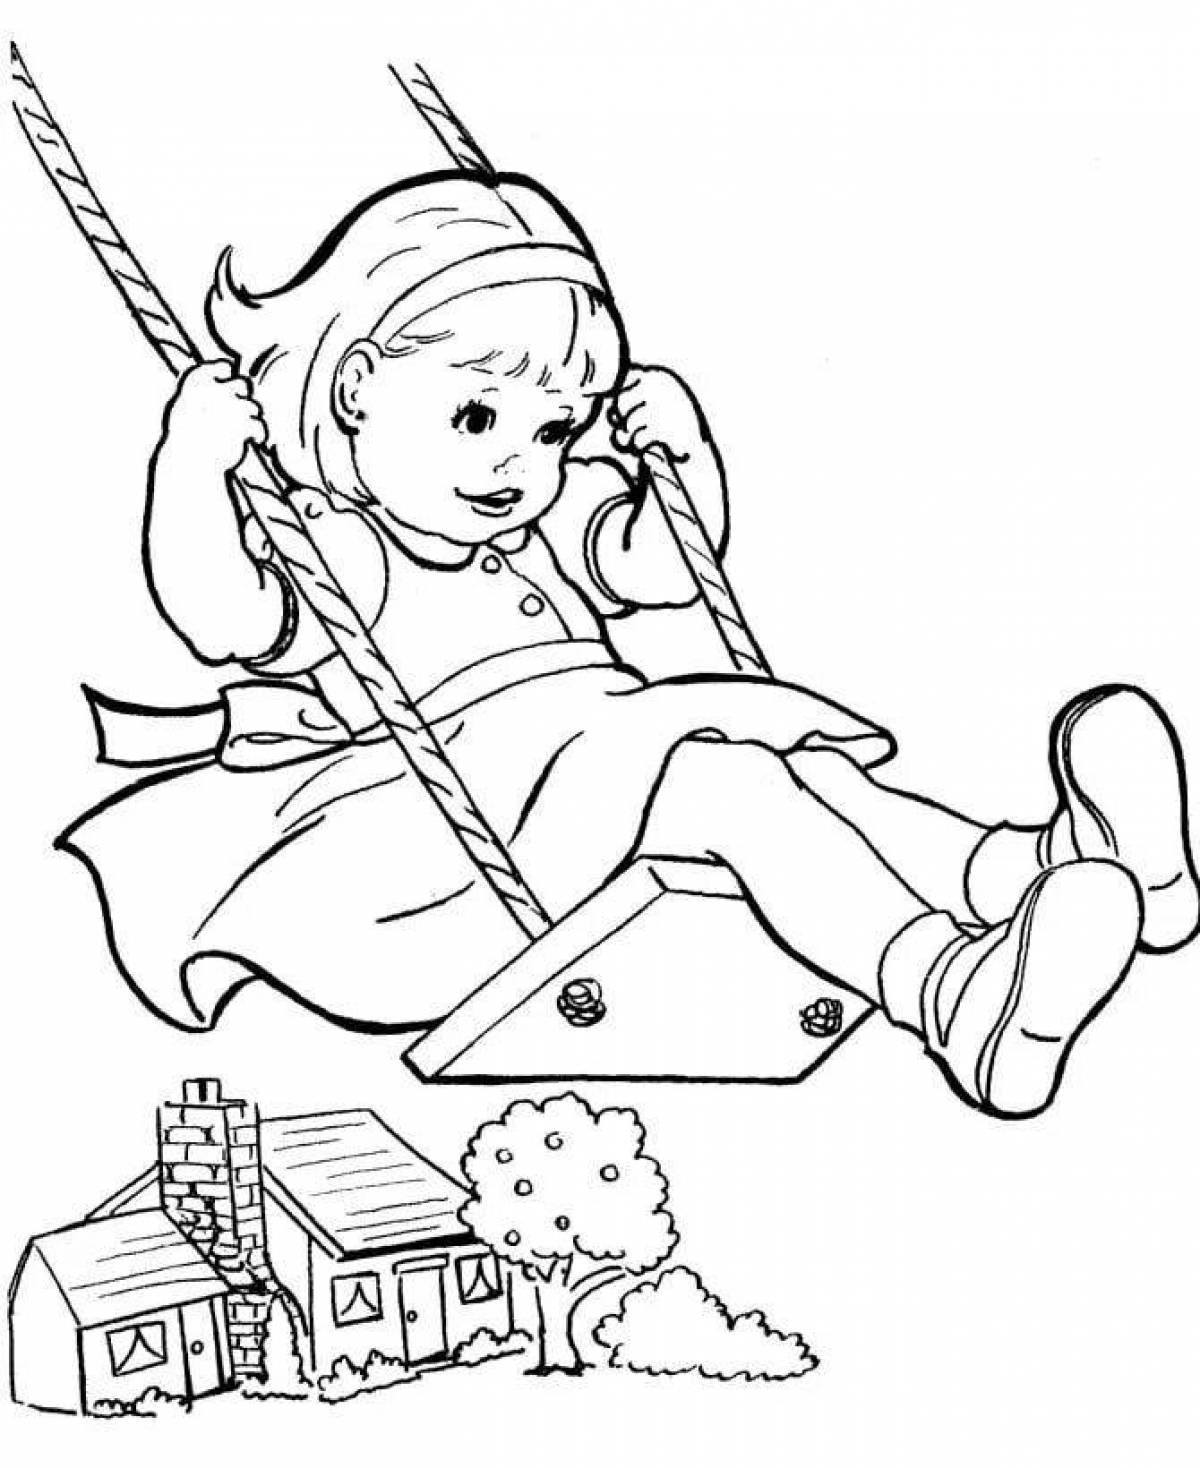 Coloring page magical childhood